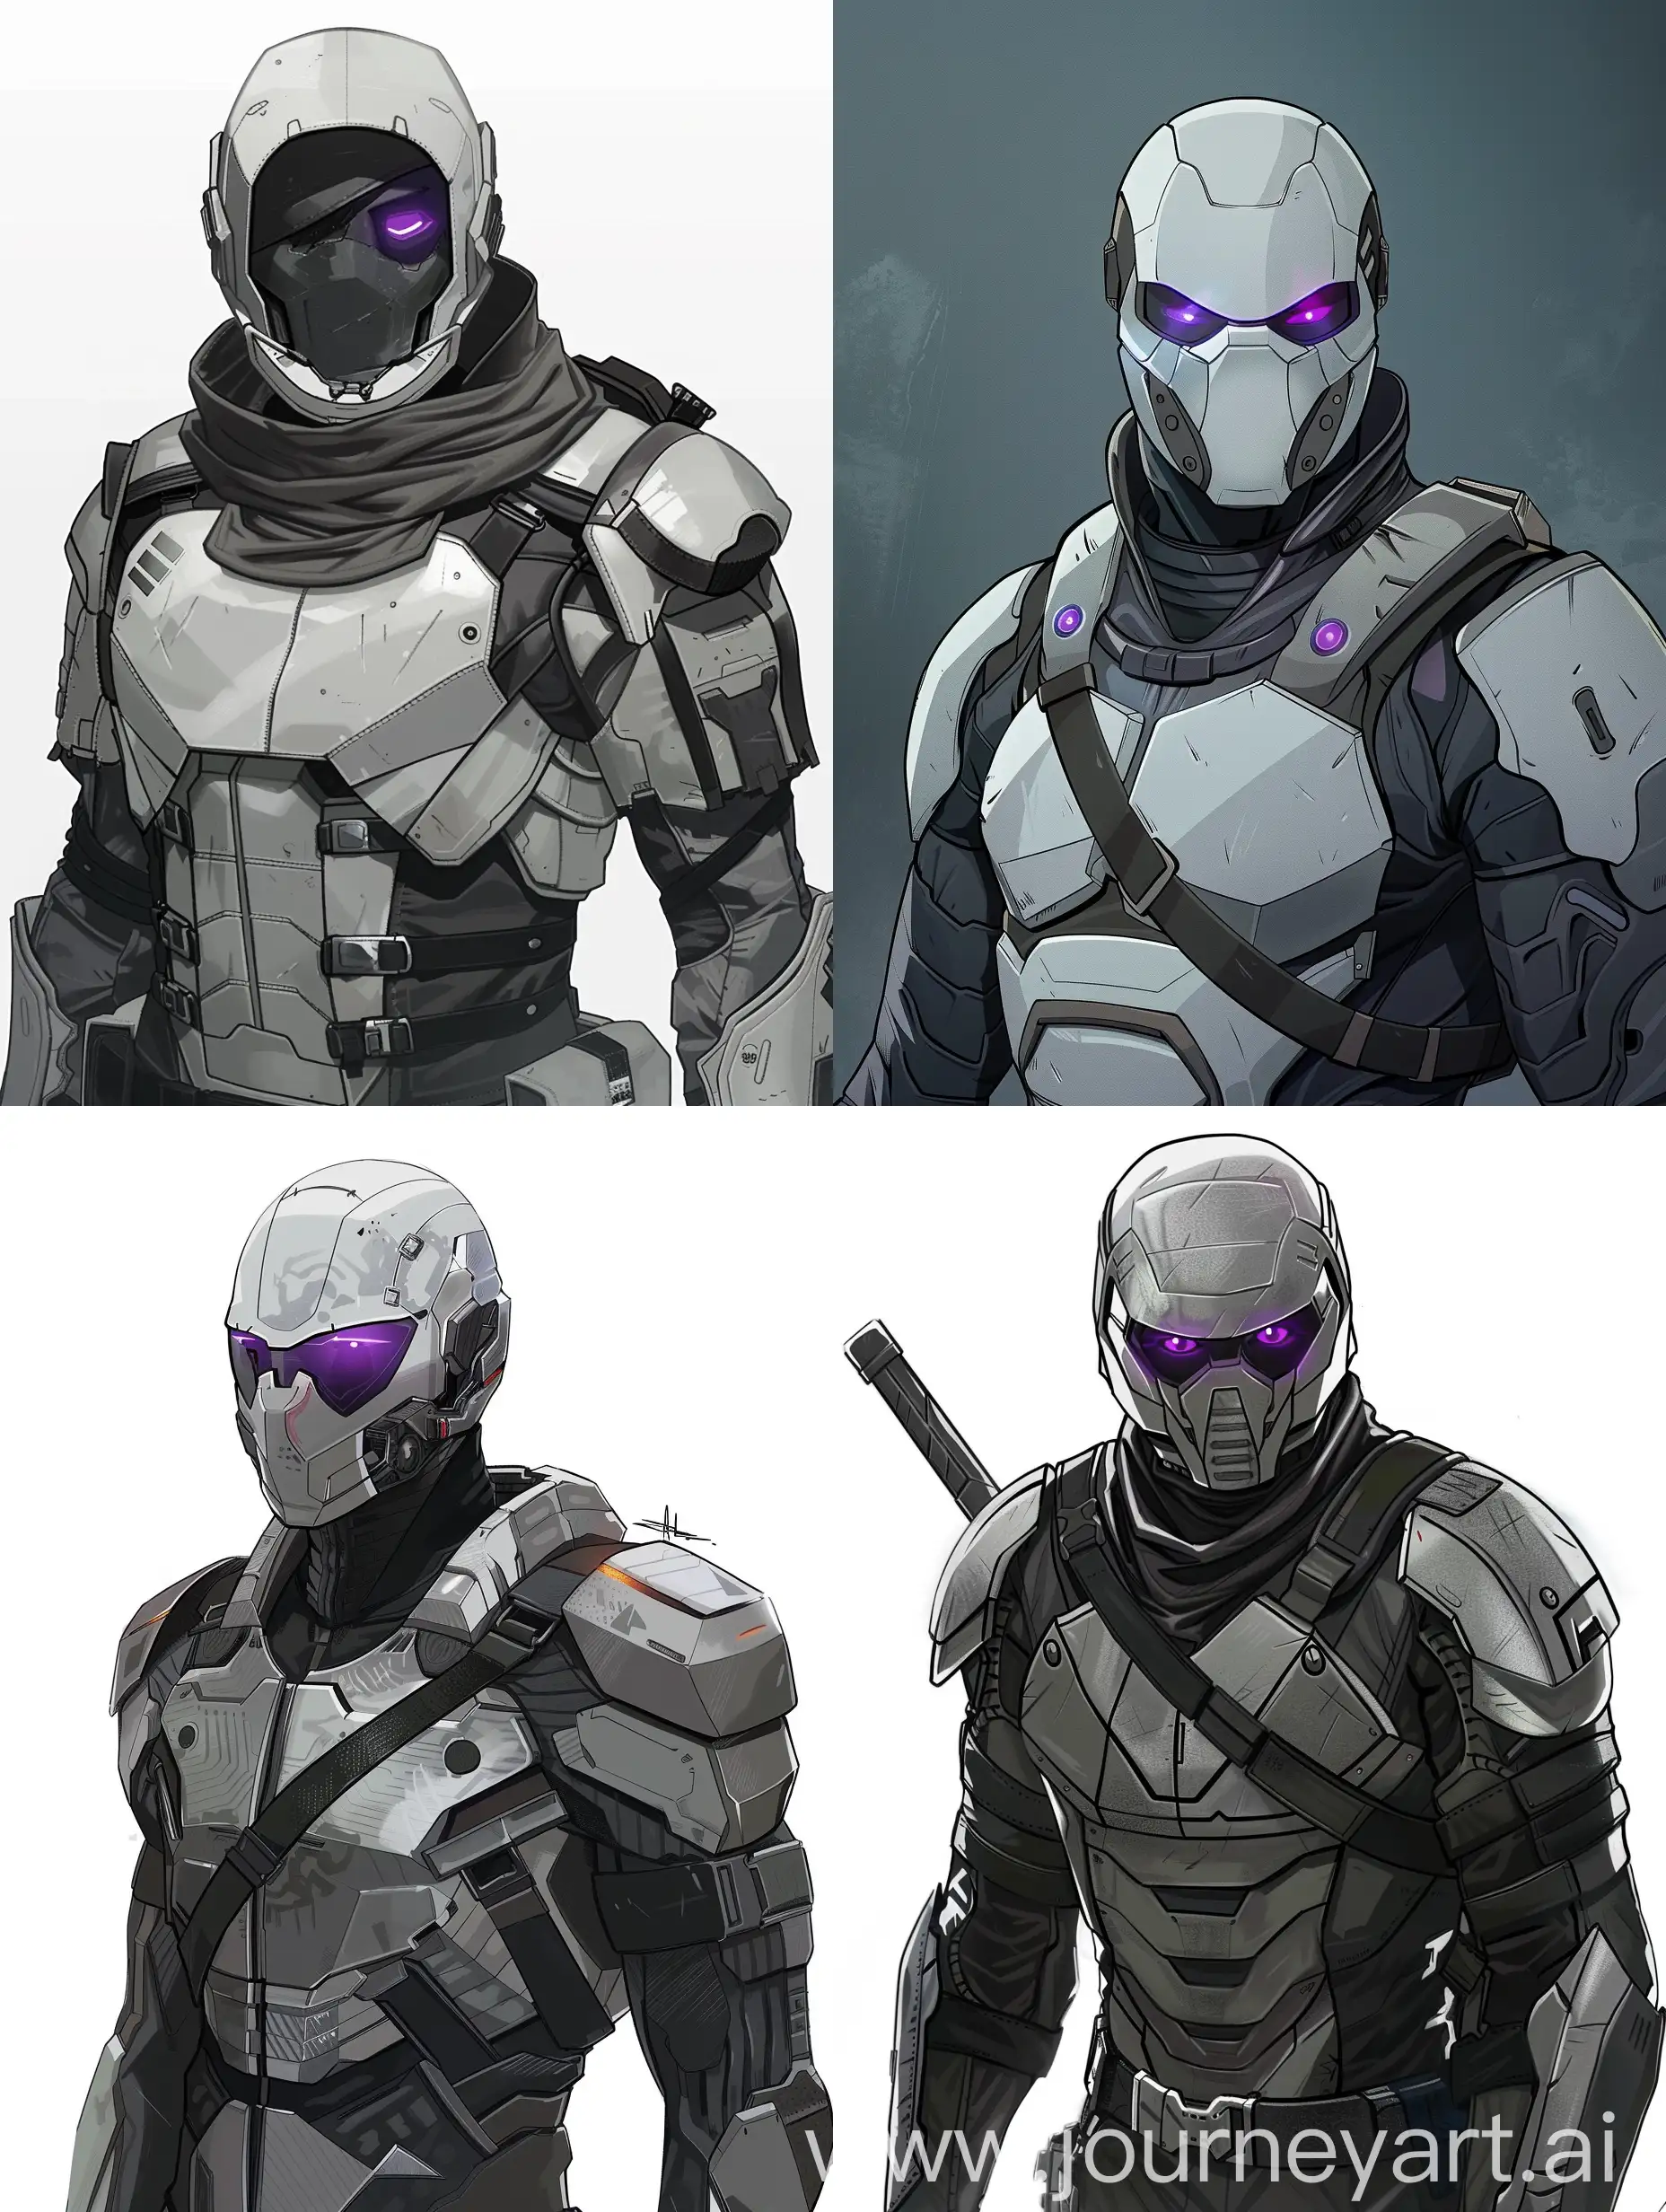 Futuristic-Assassin-in-Silver-Tactical-Suit-with-Purple-Eyes